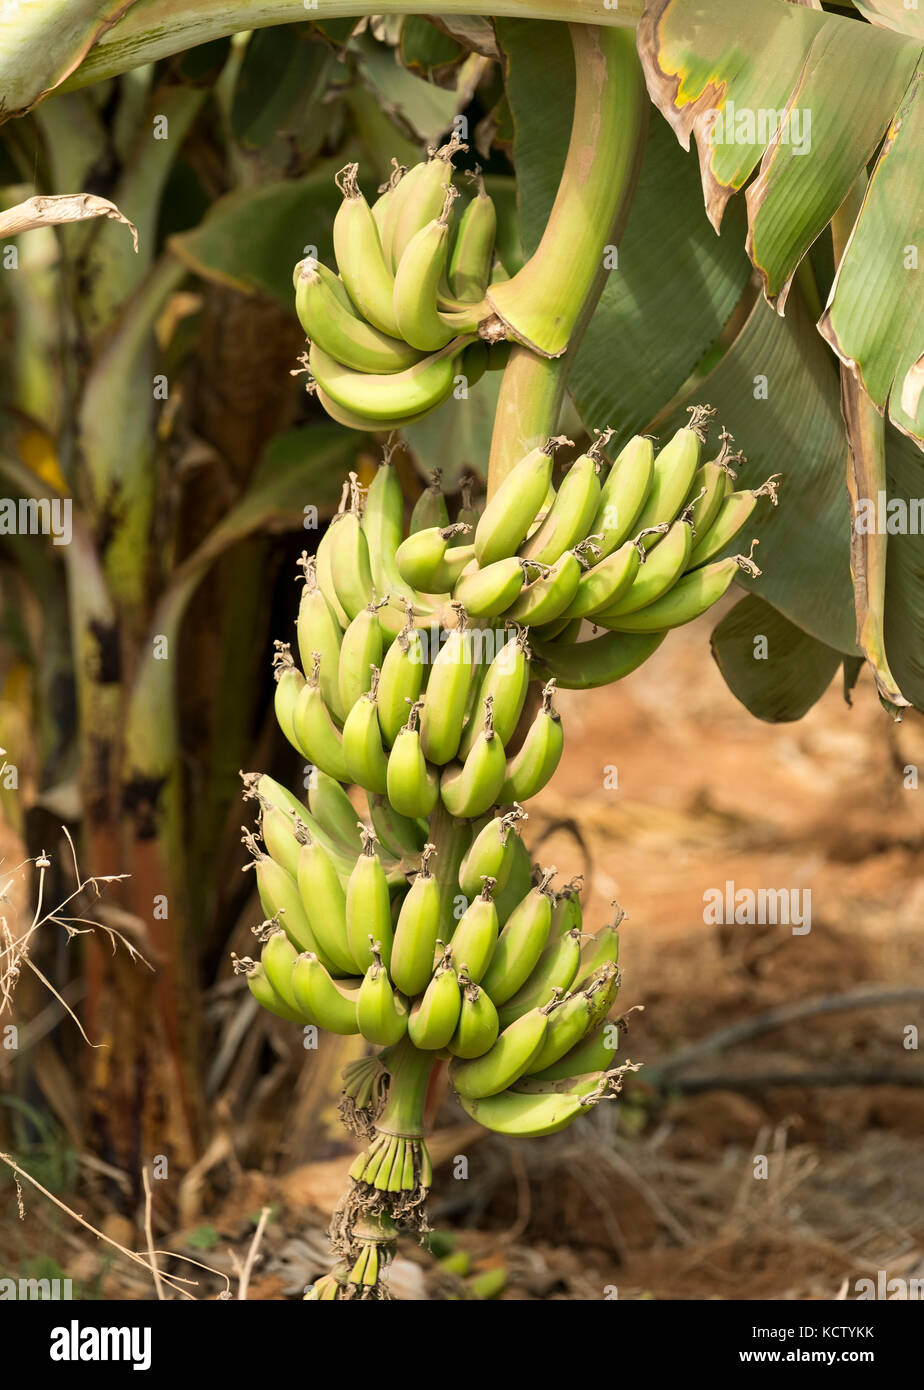 banana plantation near Paphos in the Republic of Cyprus showing bananas covered by blue plastic for protection and ripening Stock Photo